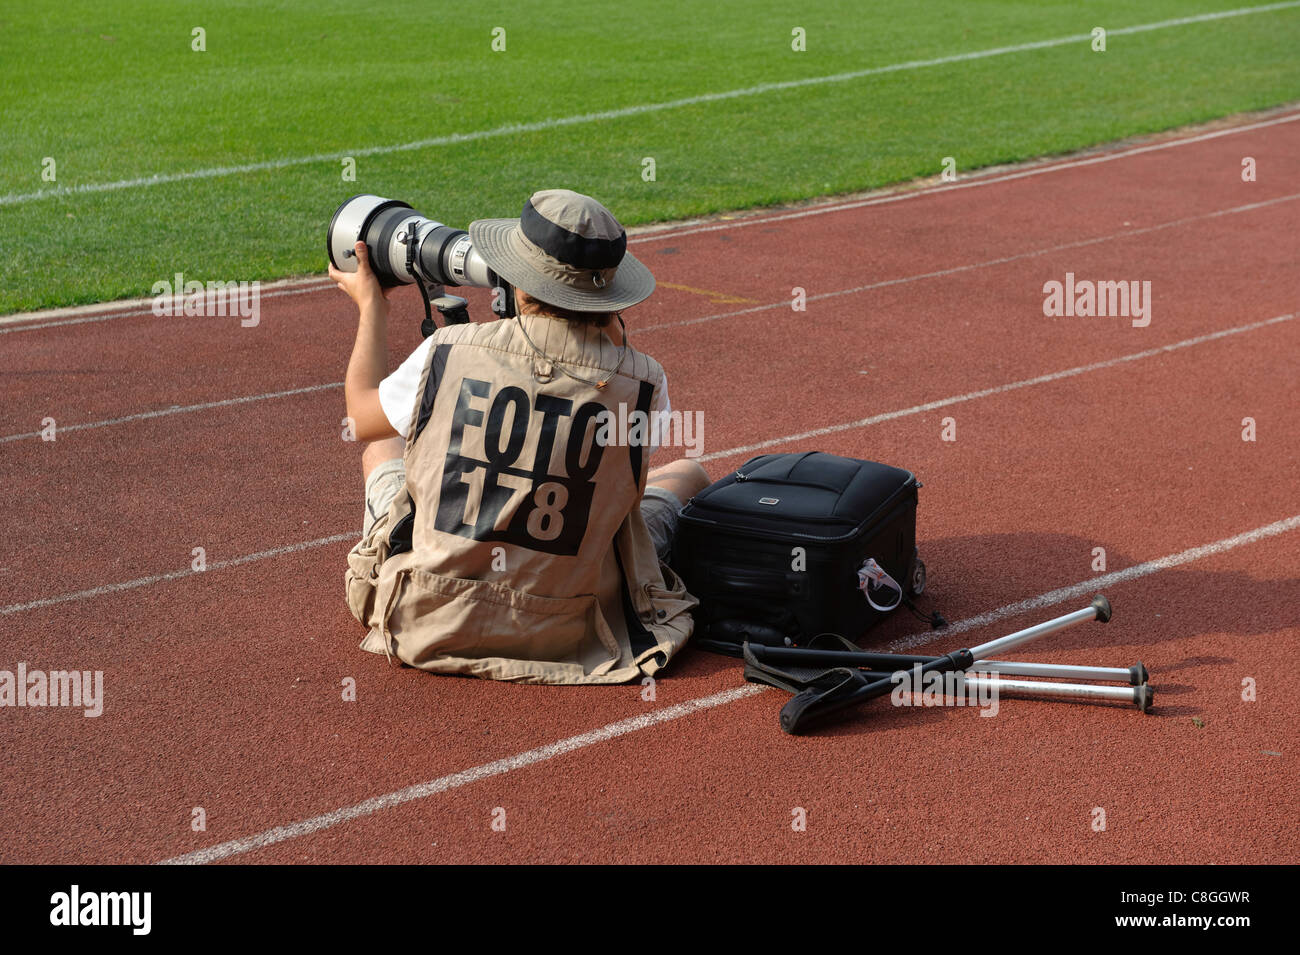 Professional photojournalist taking photos at sporting event Stock Photo